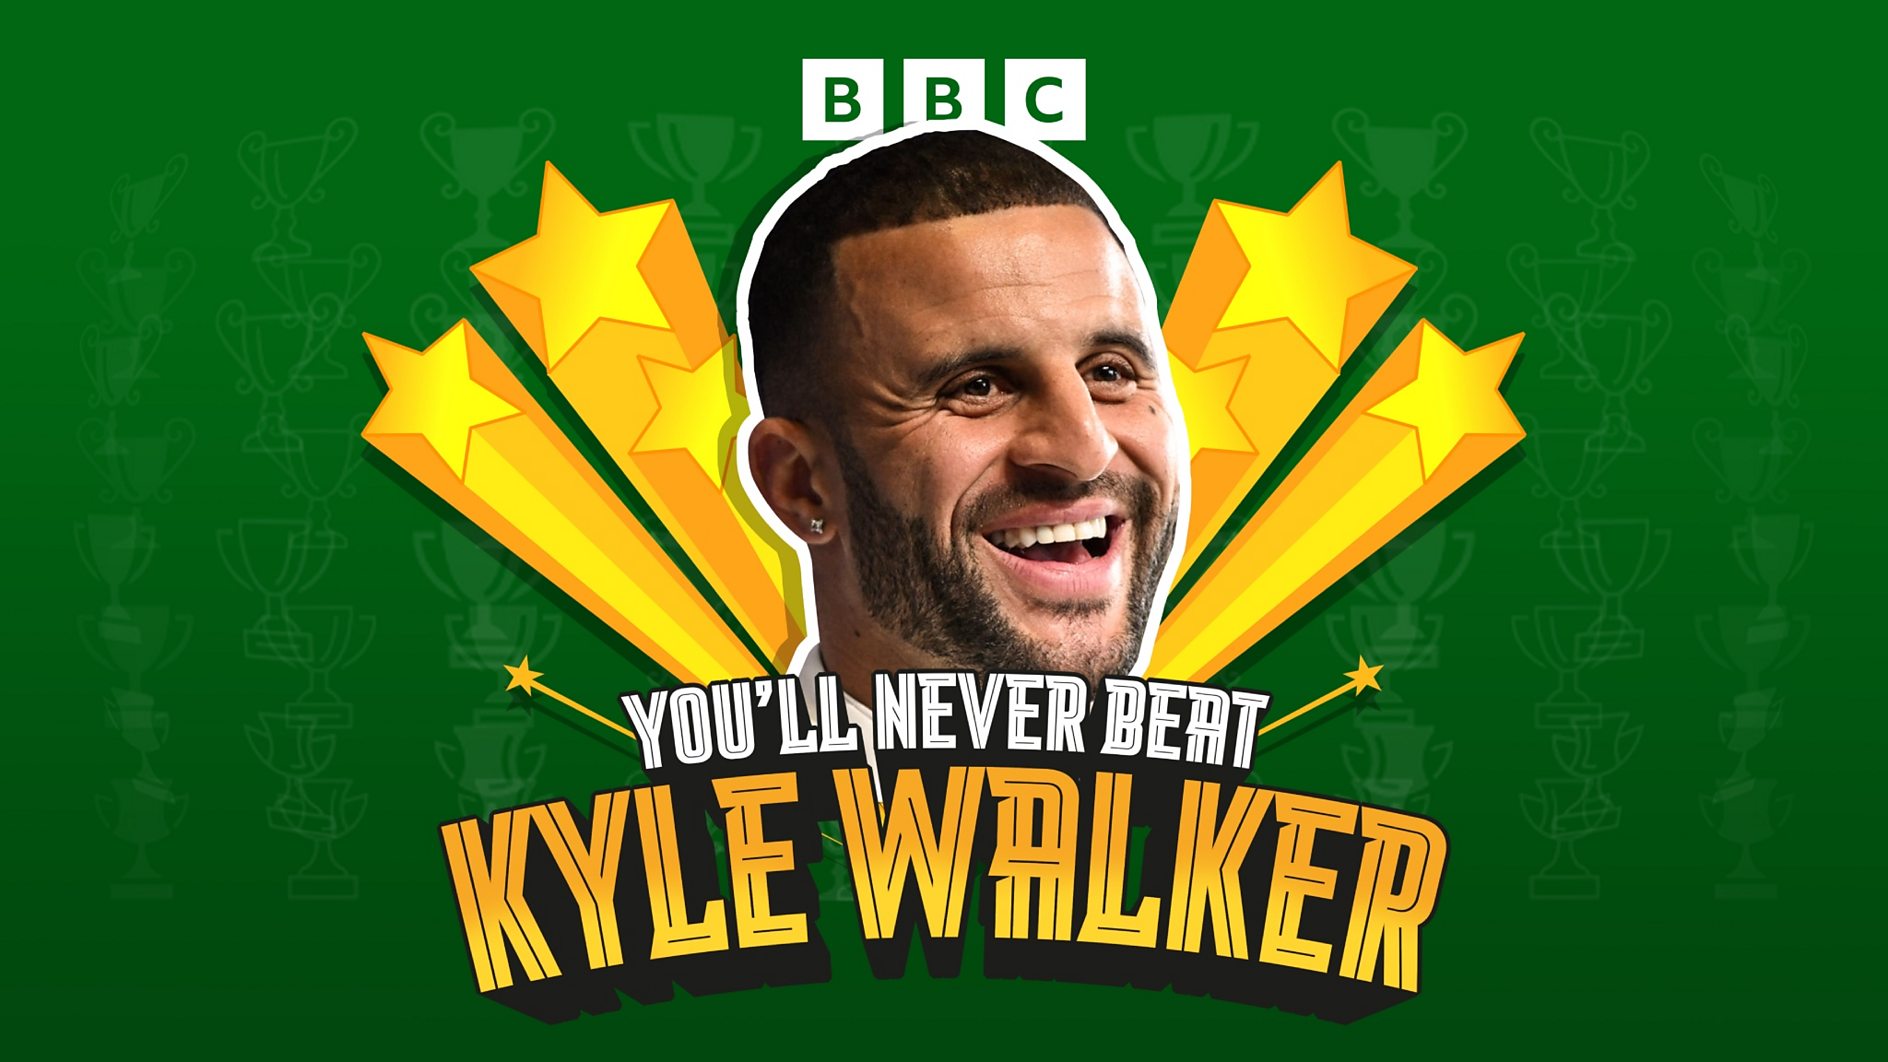 New BBC Sounds podcast You’ll Never Beat Kyle Walker